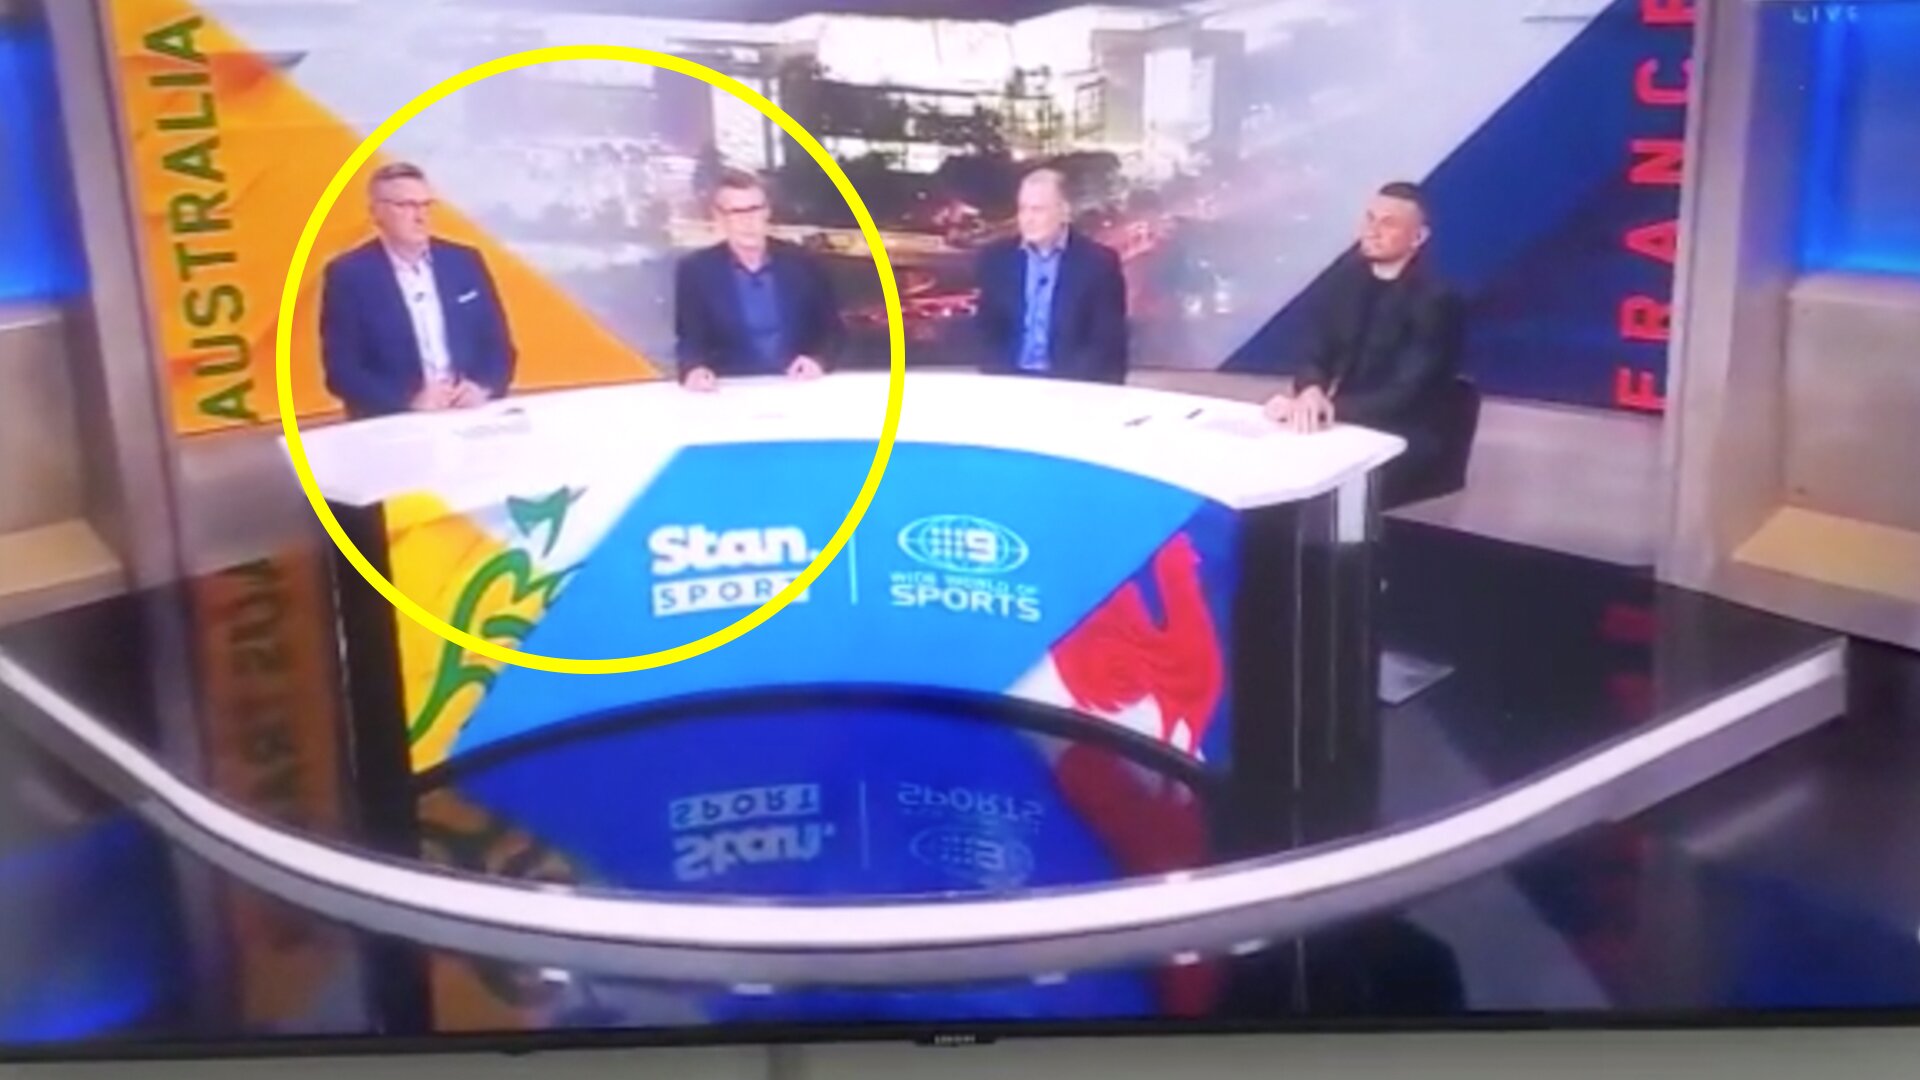 Incredibly awkward moment on Australian rugby TV as presenter goes blank